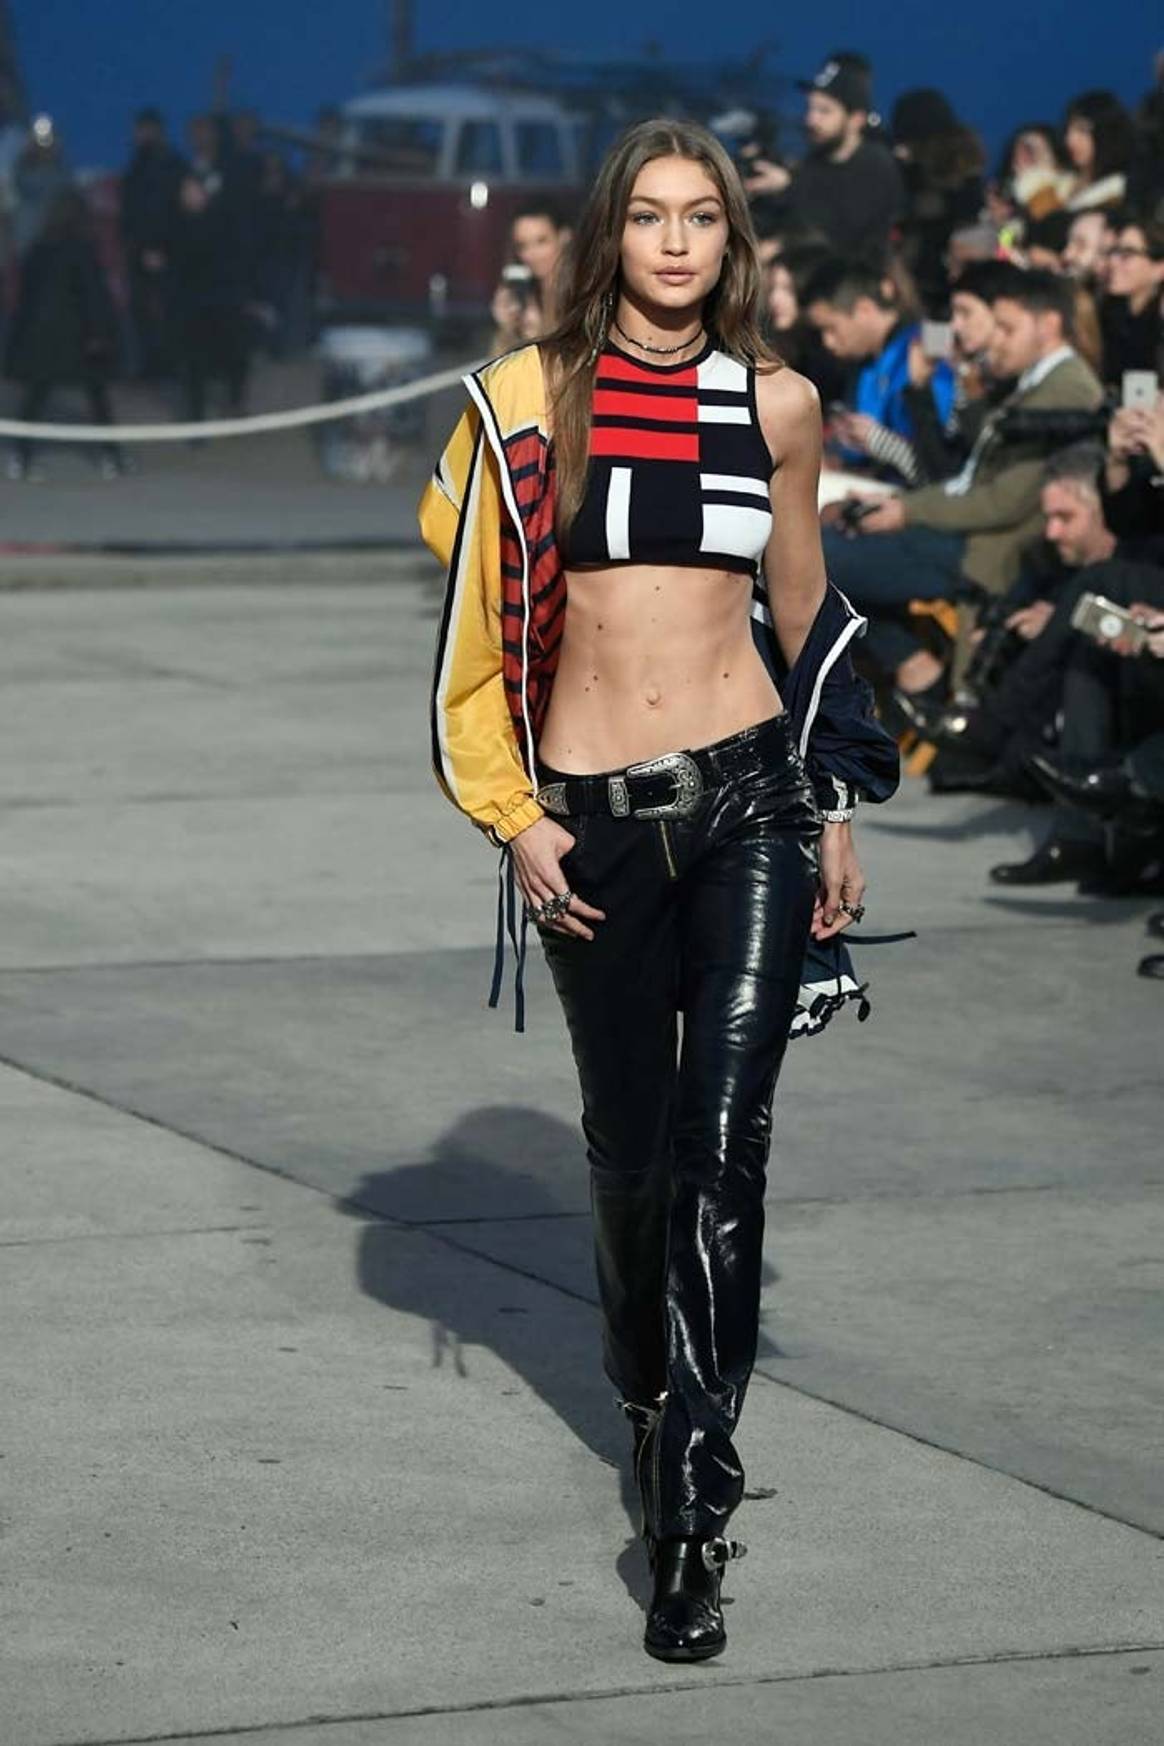 In Pictures: Tommy Hilfiger x Gigi introduce Tommyland